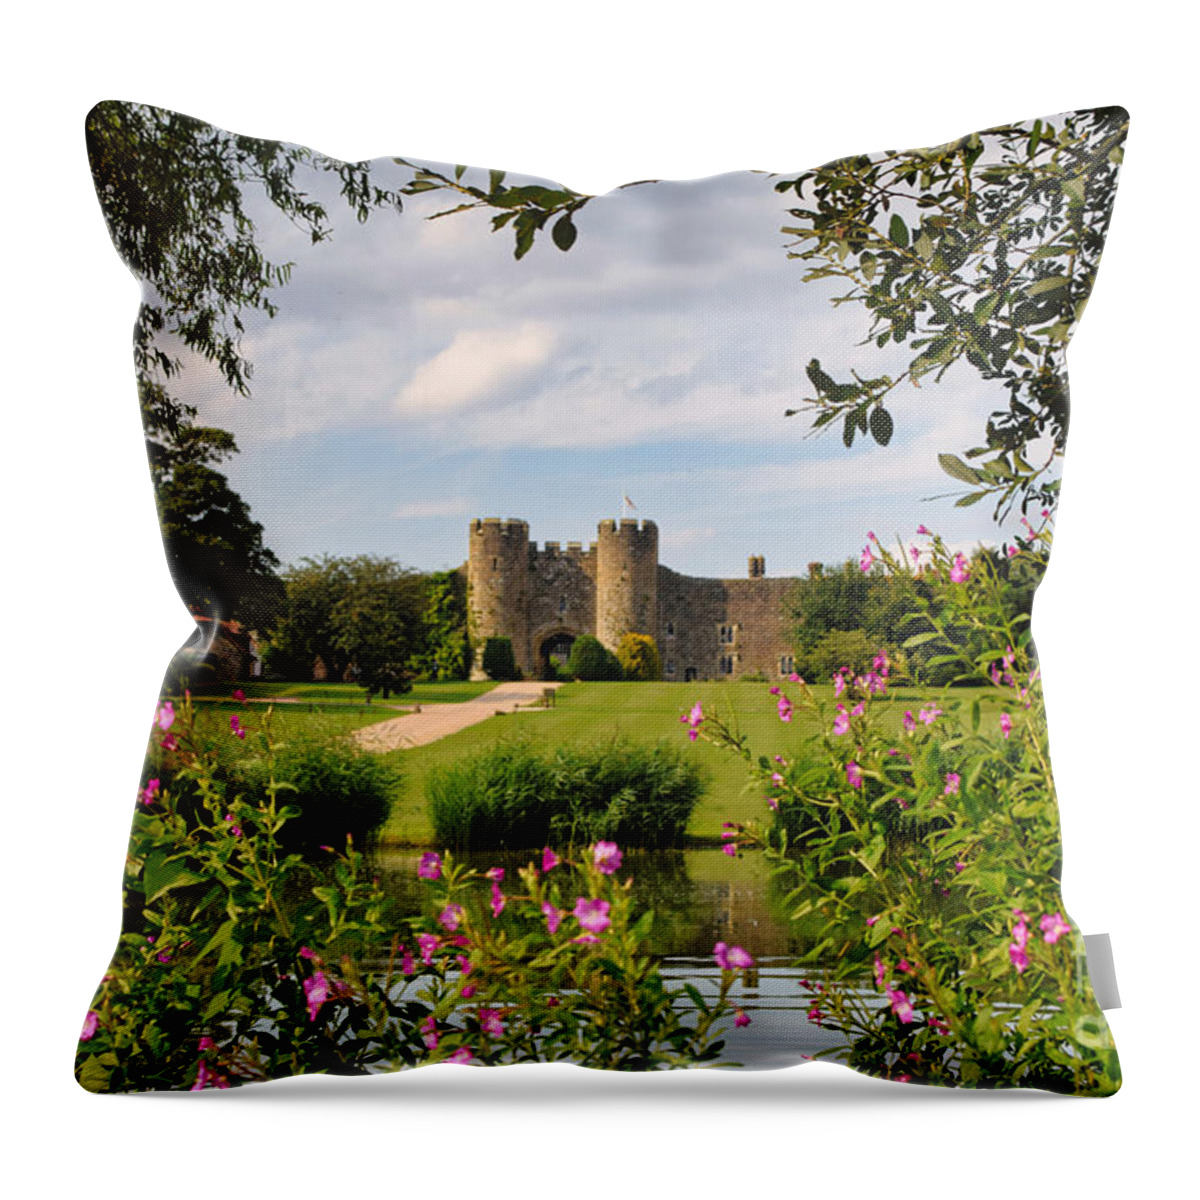 Amberley Throw Pillow featuring the photograph Amberley Castle, Arundel West Sussex, England by Abigail Diane Photography